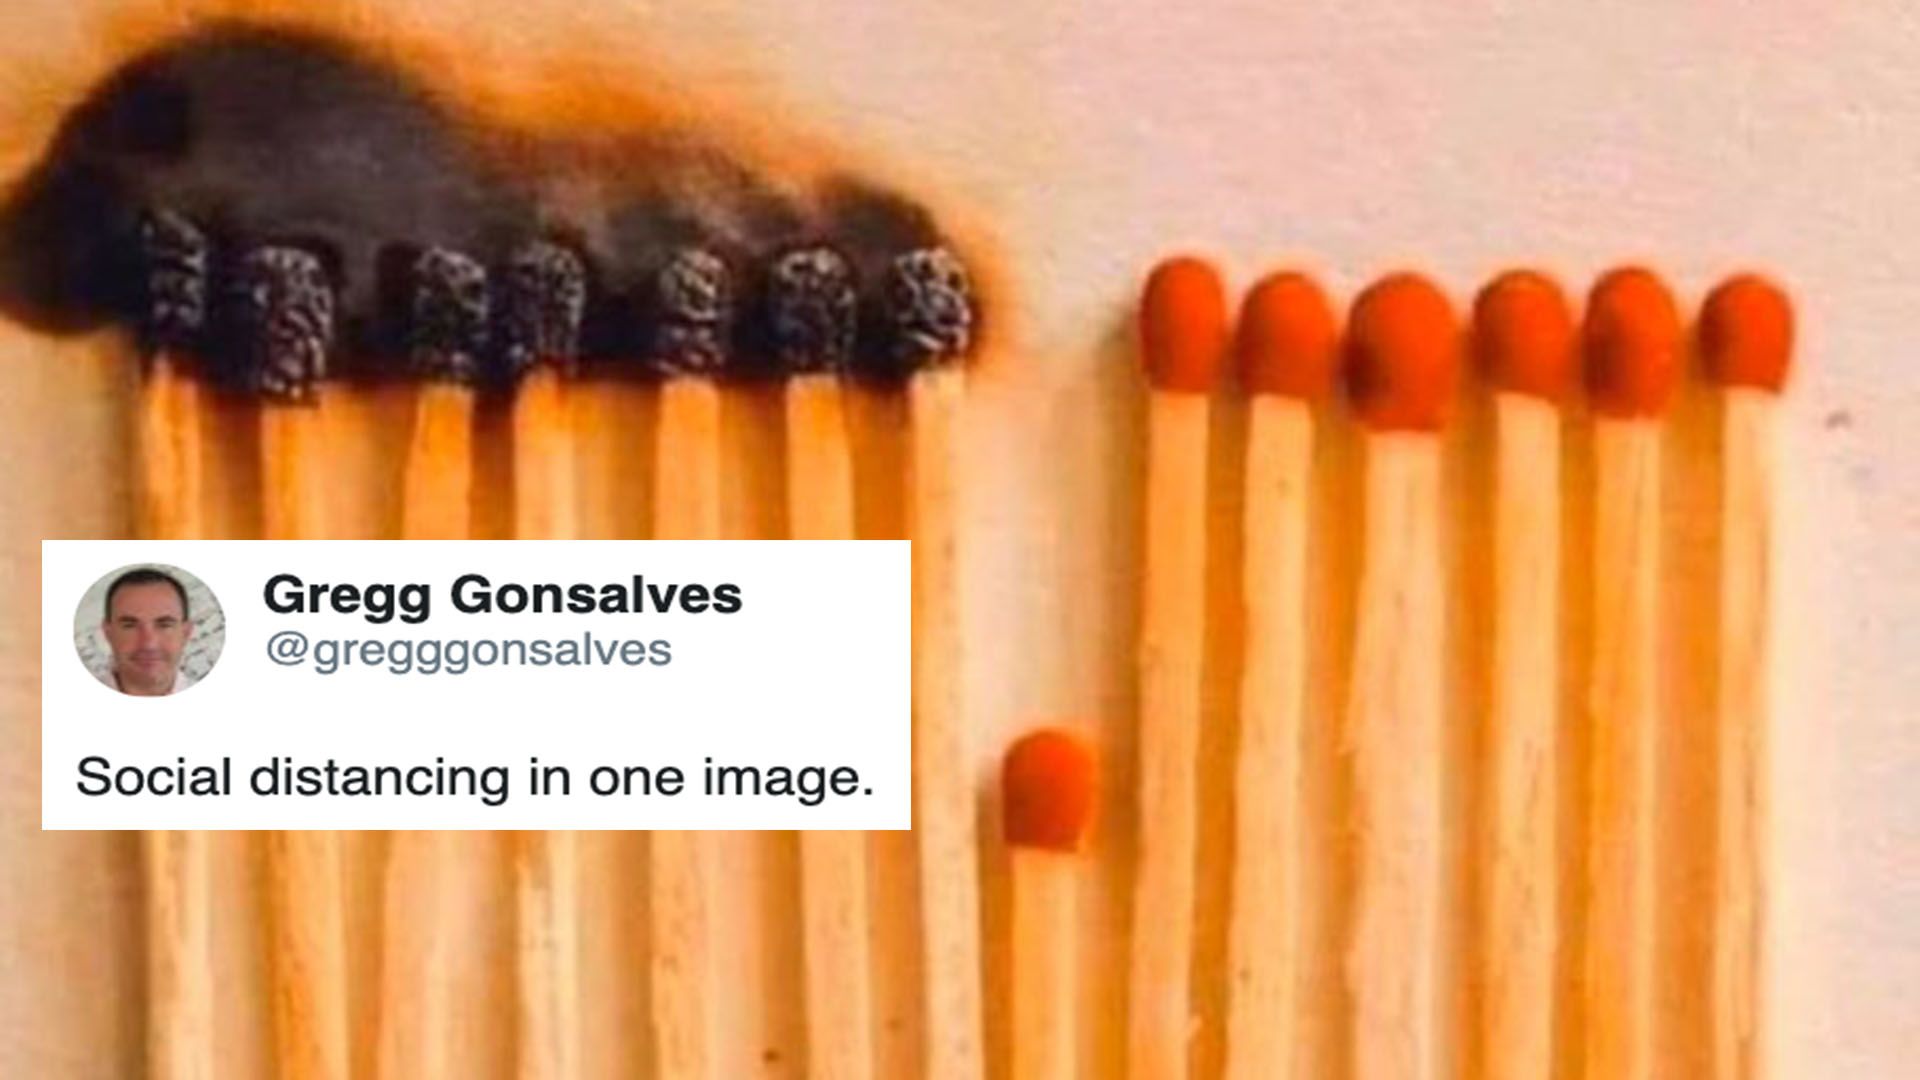 These image of matches perfectly illustrate how we can help stop